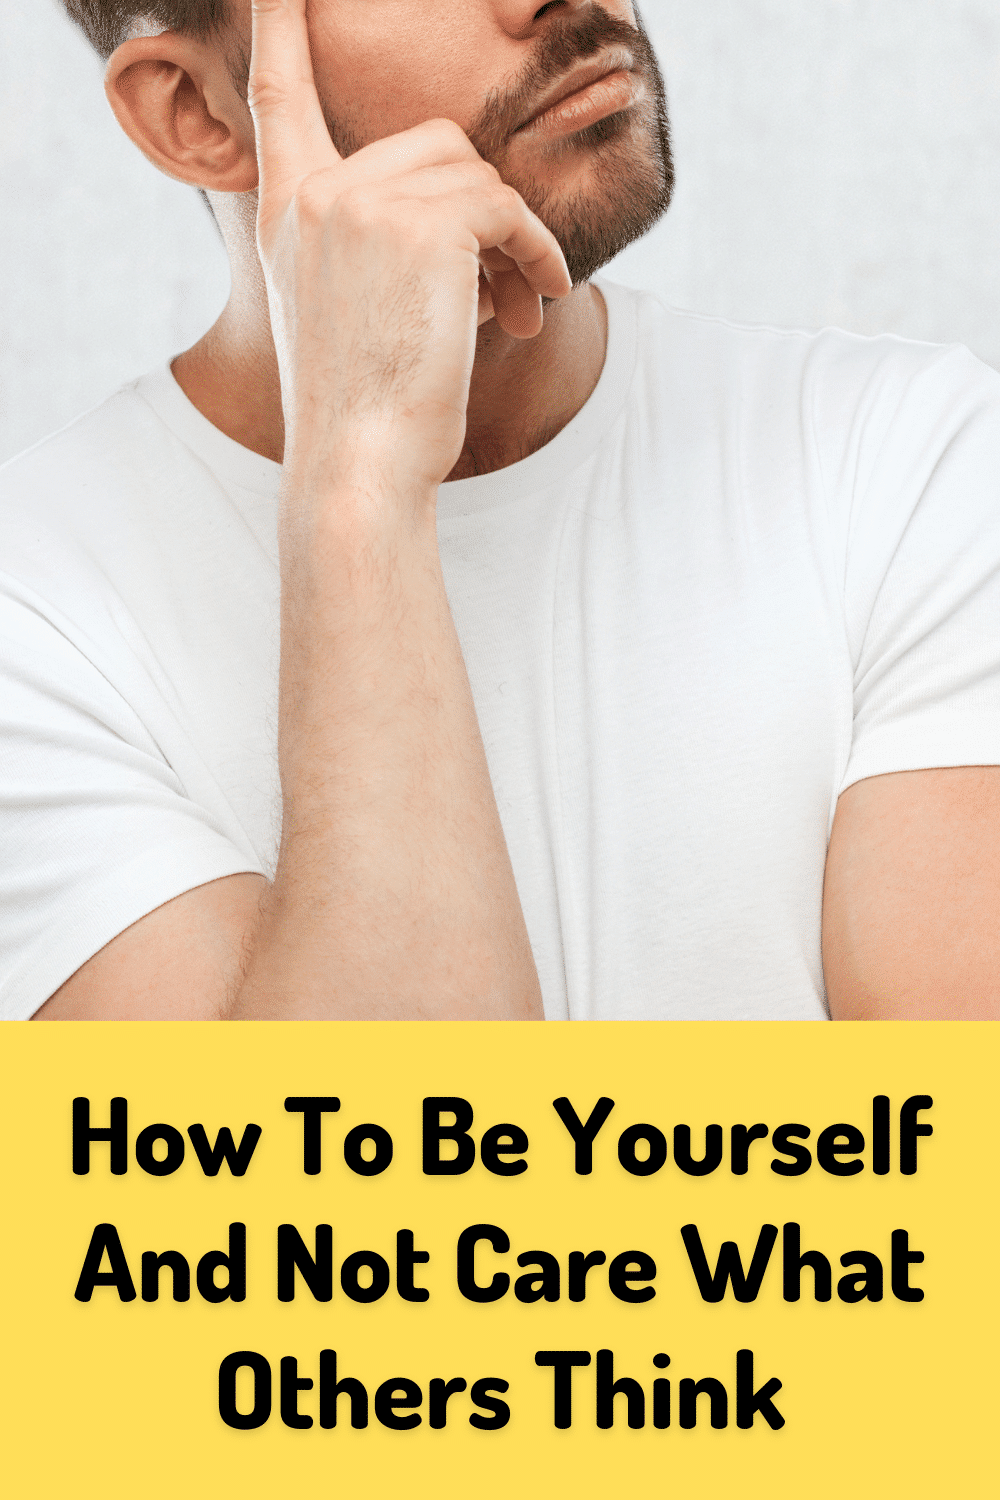 How To Be Yourself And Not Care What Others Think